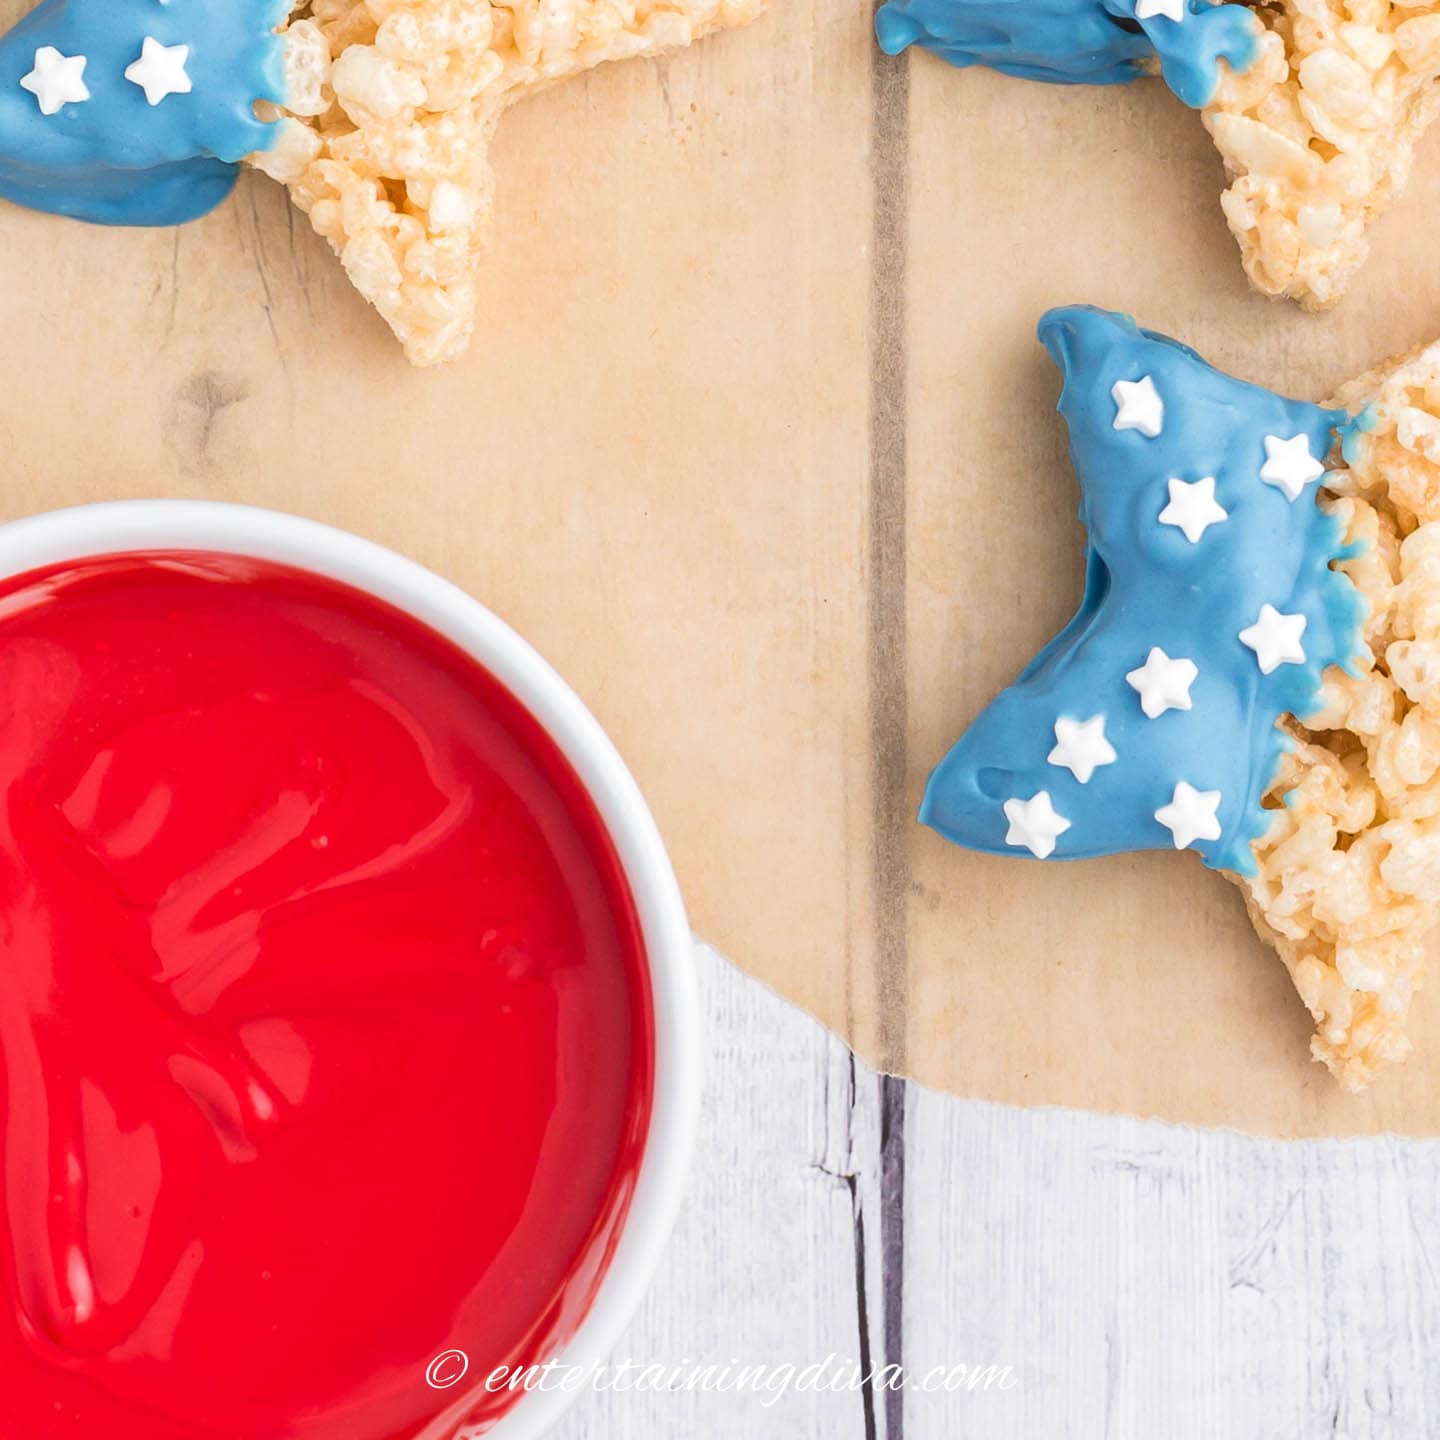 a bowl of melted red candy melts beside blue and white star-shaped rice krispie treats